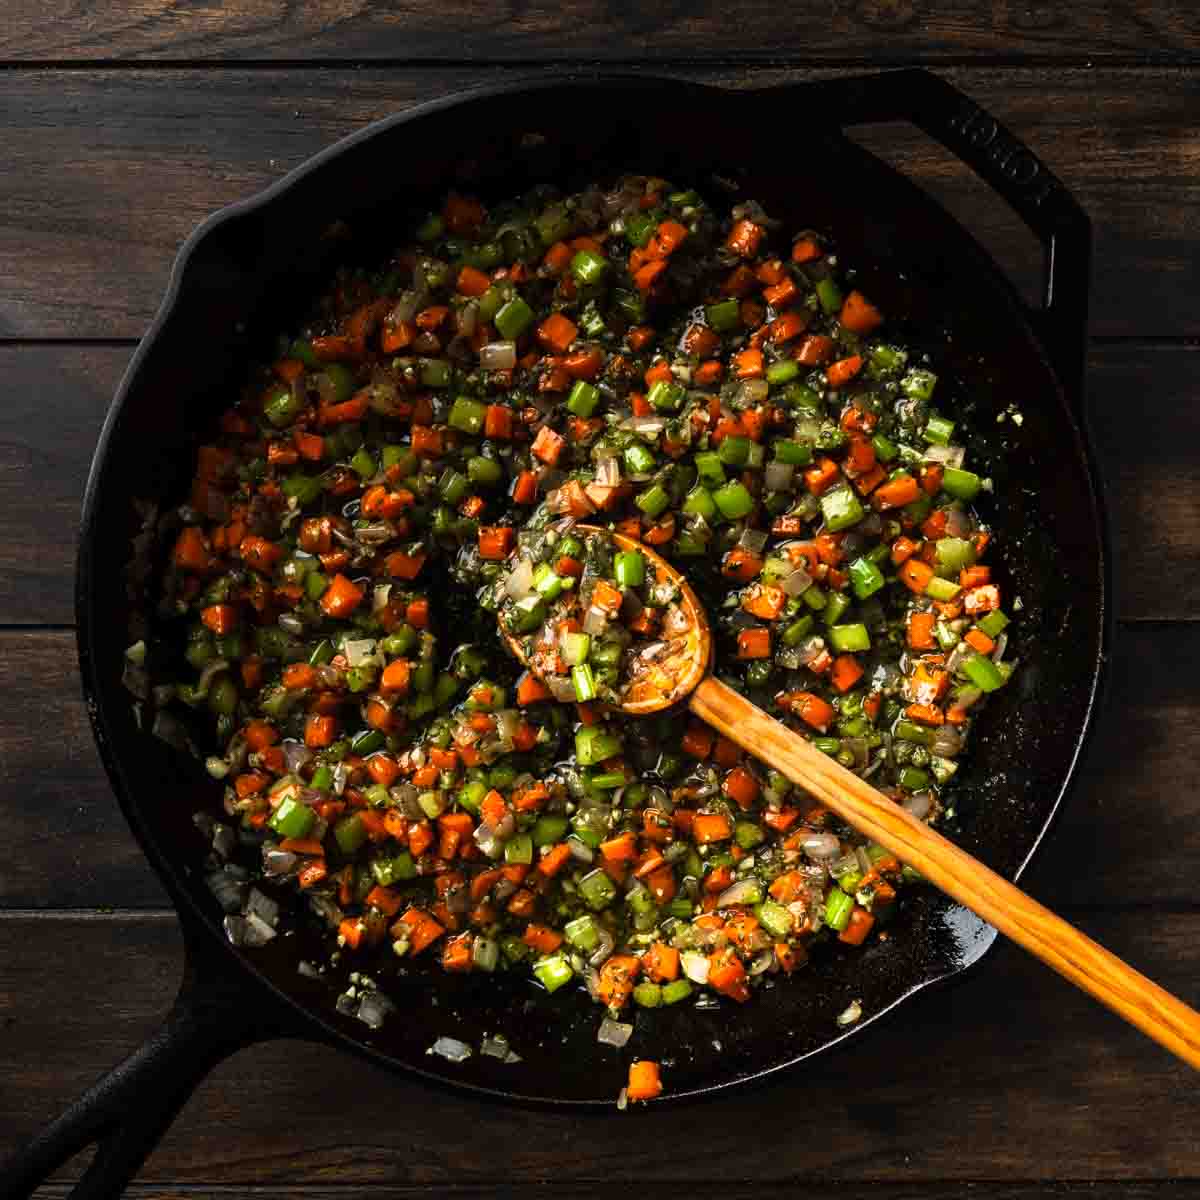 A skillet full of cooked mirepoix seasoned with minced garlic and lots of herbs.